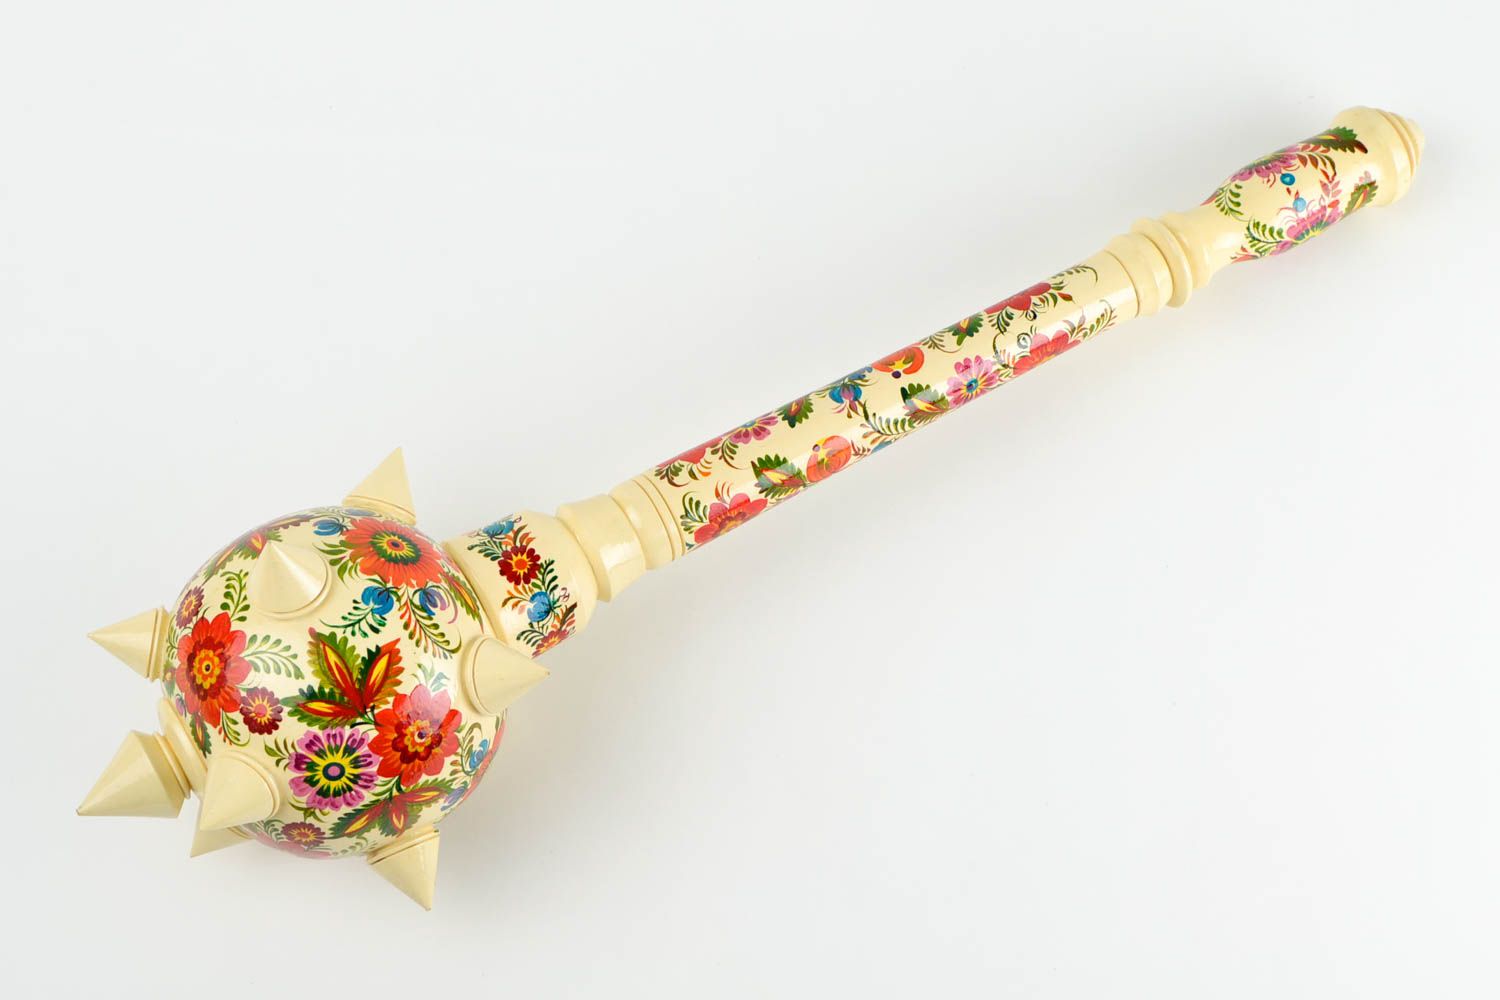 Handmade wooden mace weapon decorative painted mace decorative use only photo 4